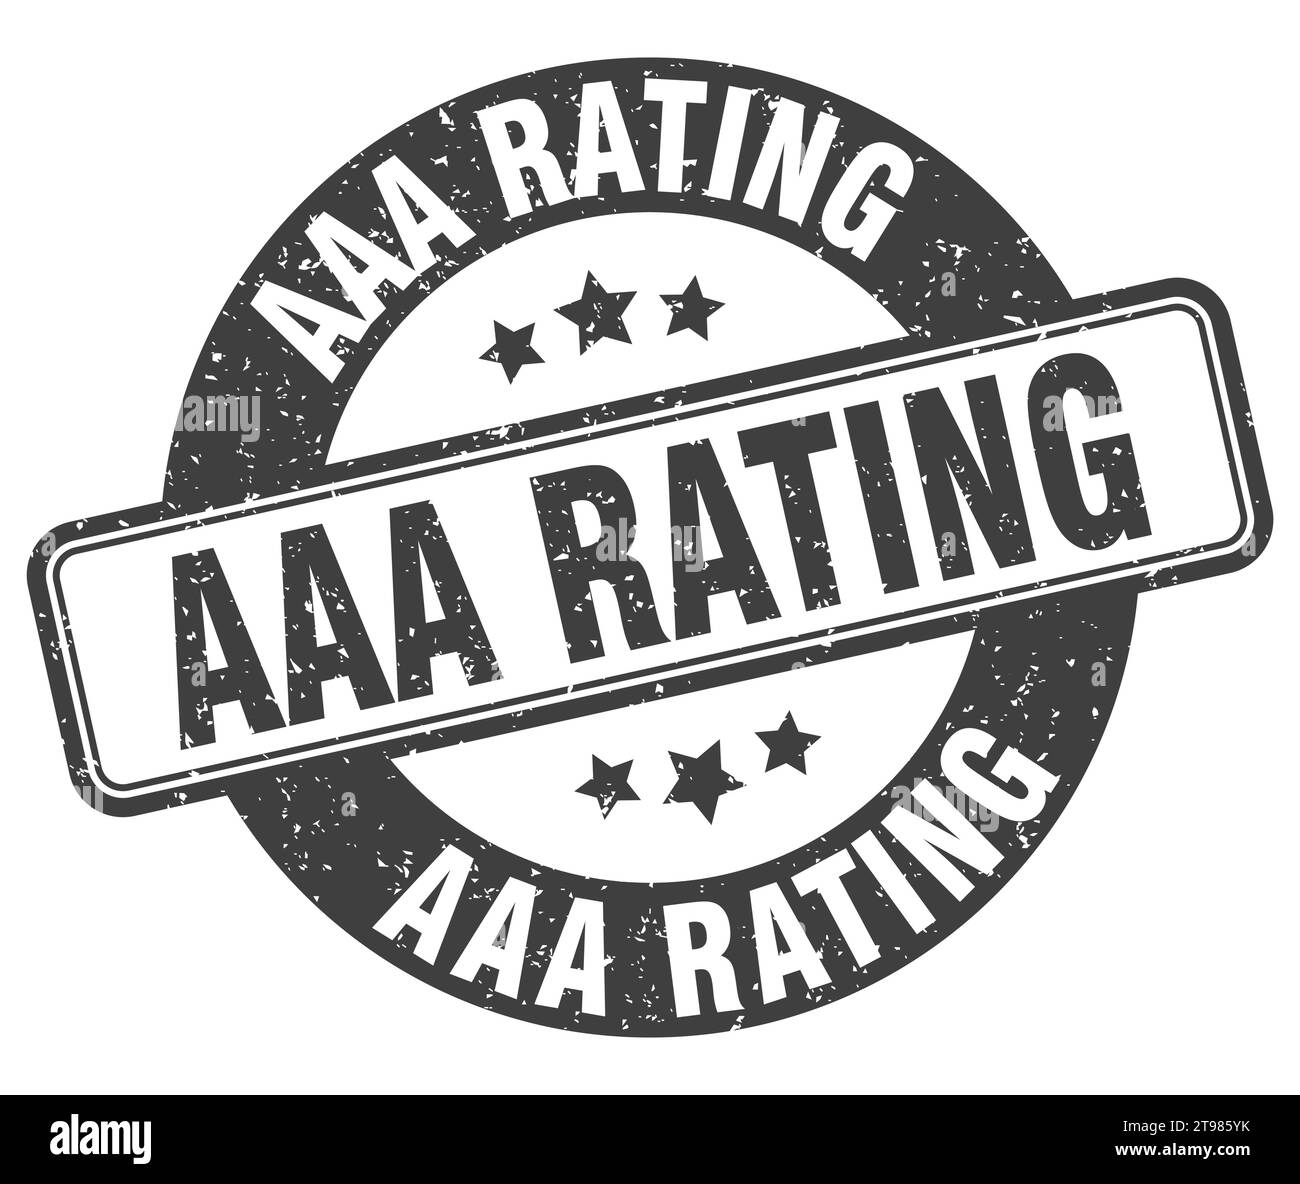 aaa rating stamp. aaa rating sign. round grunge label Stock Vector